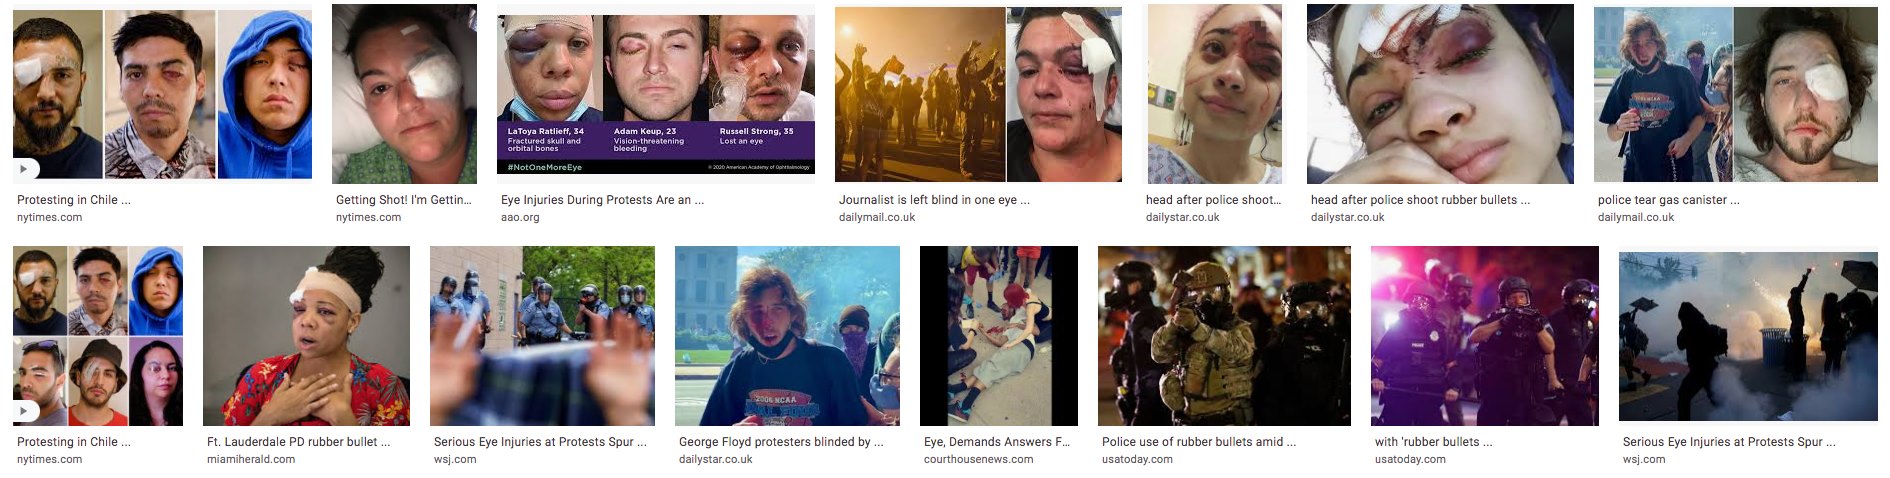 American protestors got eyes shot with rubber bullets for exercising their right to free speech